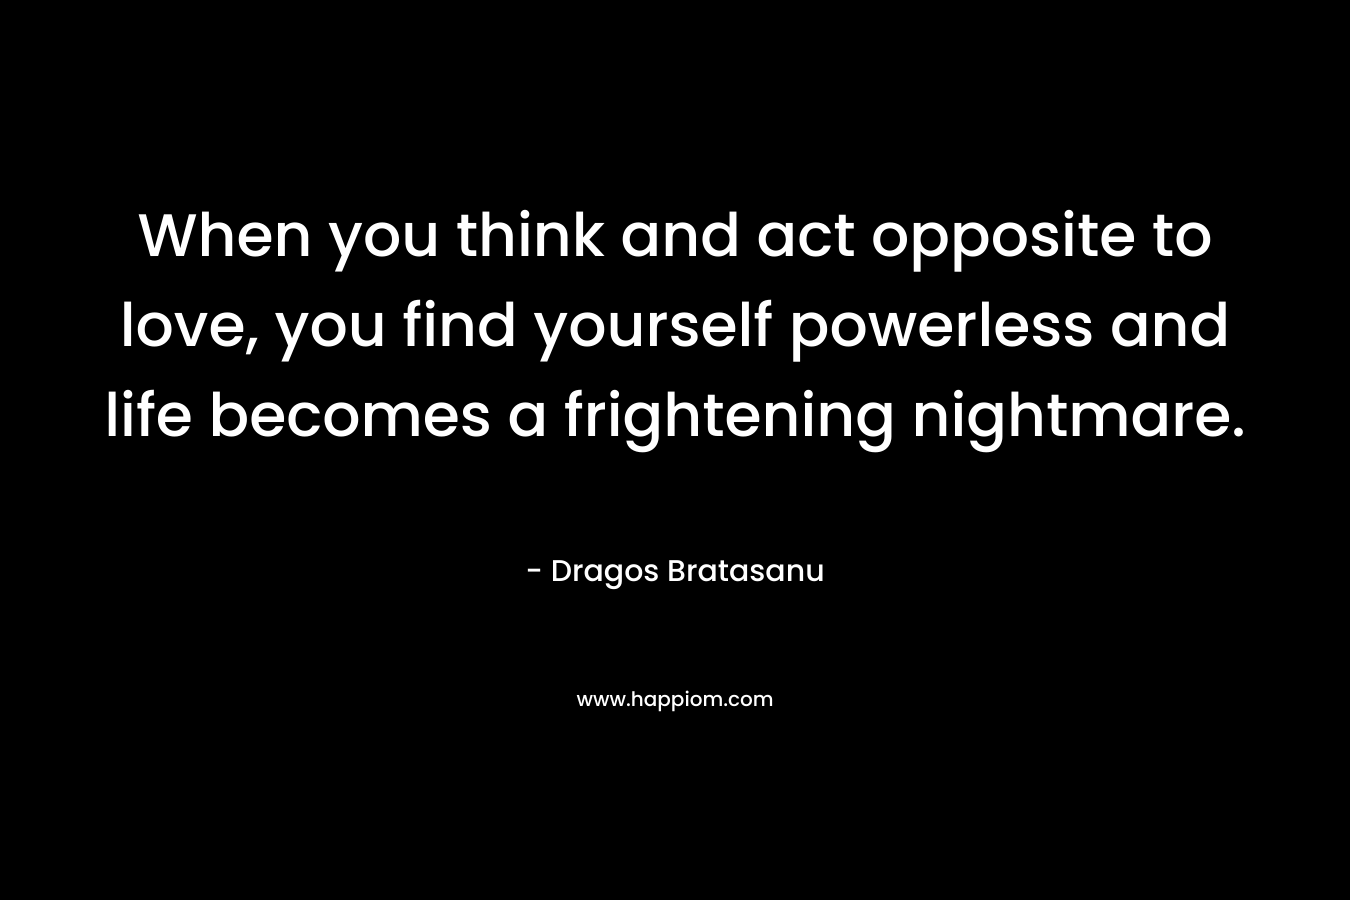 When you think and act opposite to love, you find yourself powerless and life becomes a frightening nightmare.